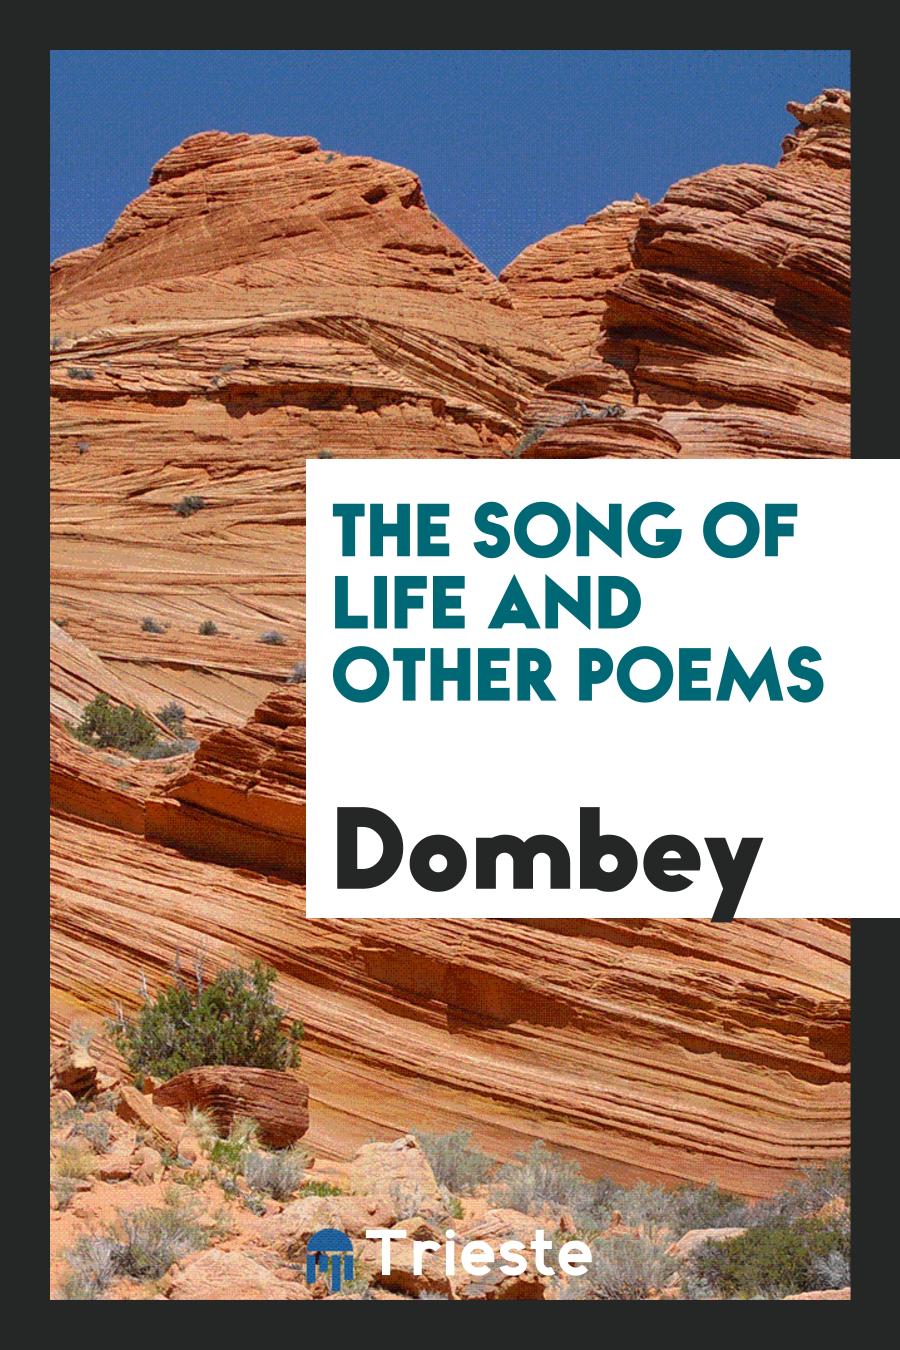 The song of life and other poems